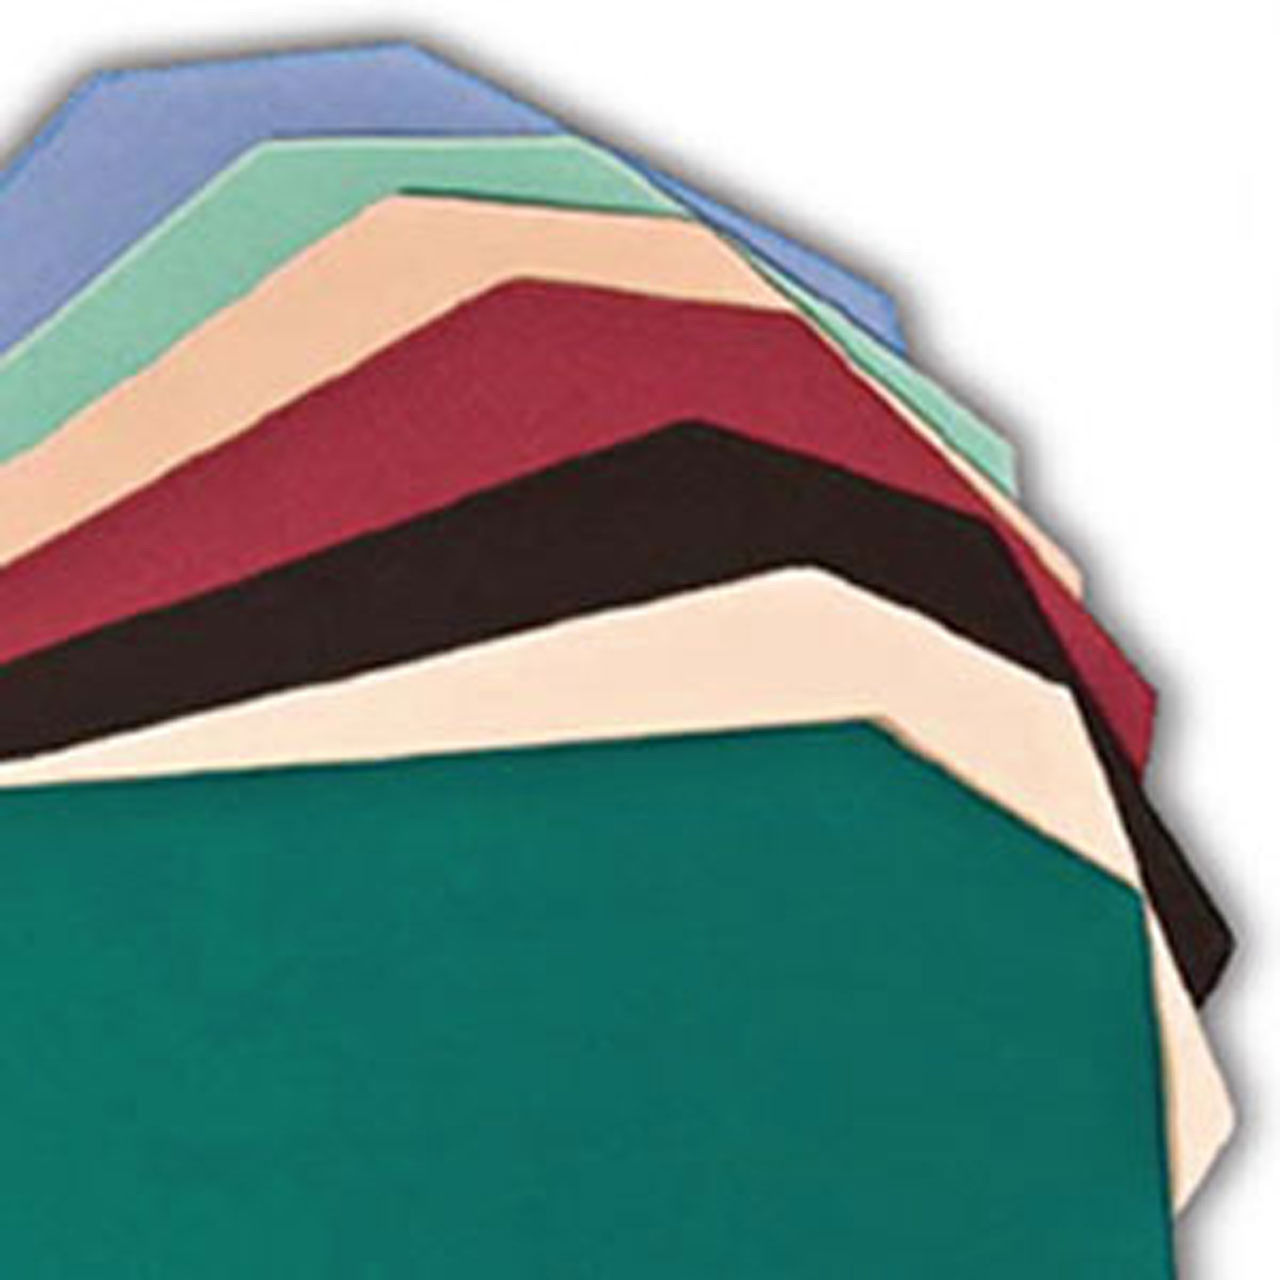 What designs can you conceive using the color range of our Spun Poly Economy Place Mats?